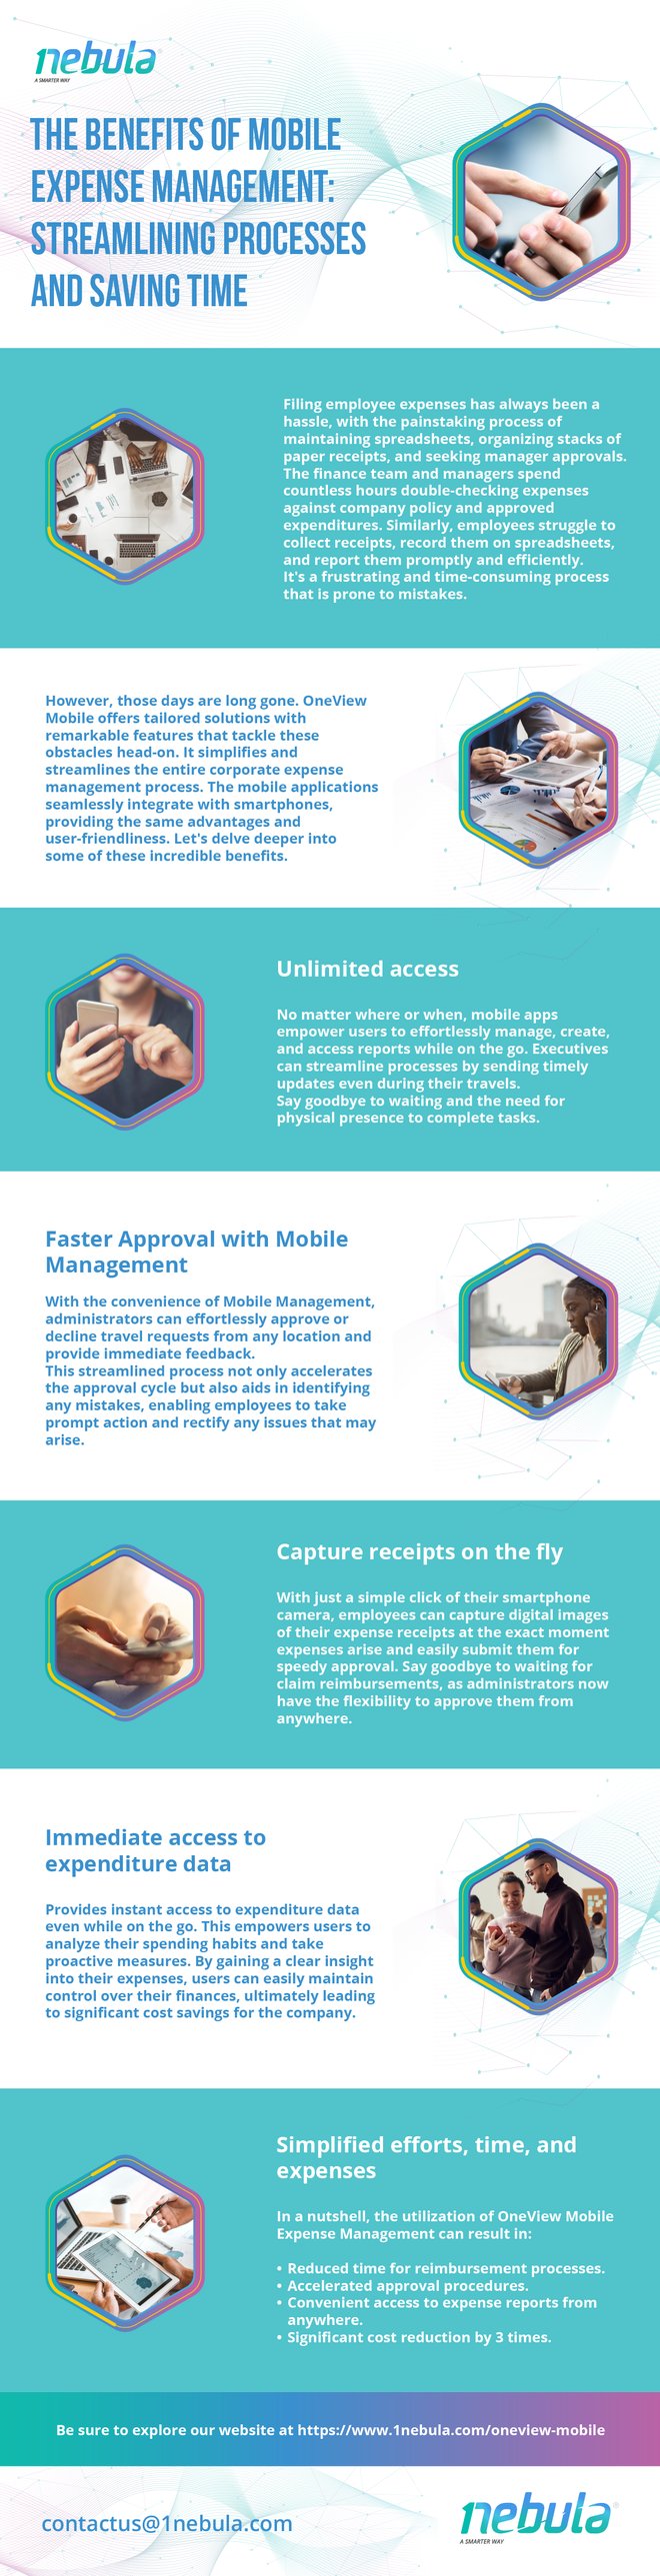 17 Oct Infographic_The Benefits of Mobile Expense Management Streamlining Processes and Saving Time-01